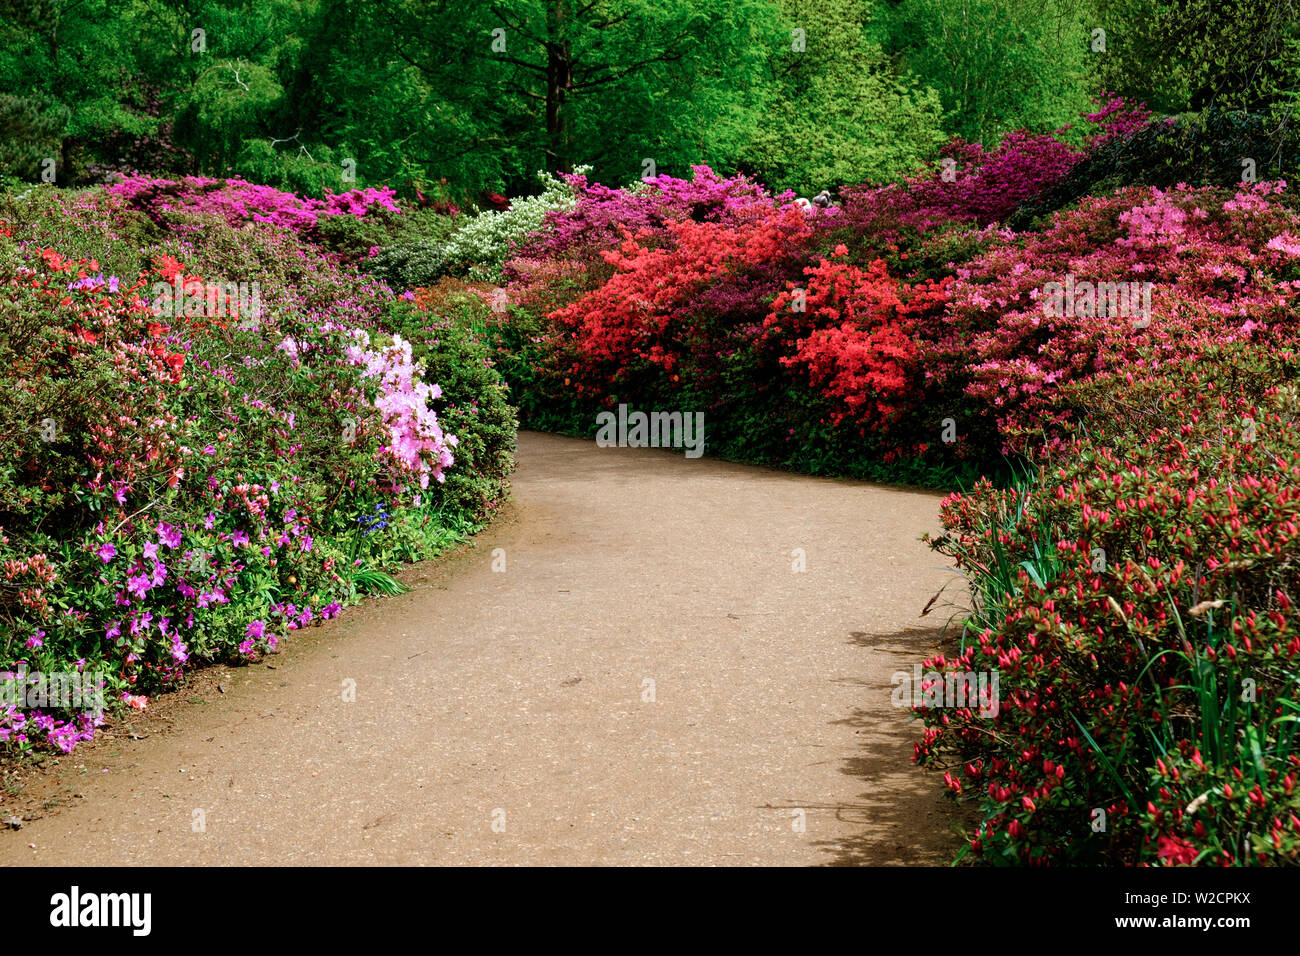 Curved path lined with shrubs of red, purple & pink flowers, green foliage & trees in background. Spring at Isabella Plantation, Richmond Park, London Stock Photo